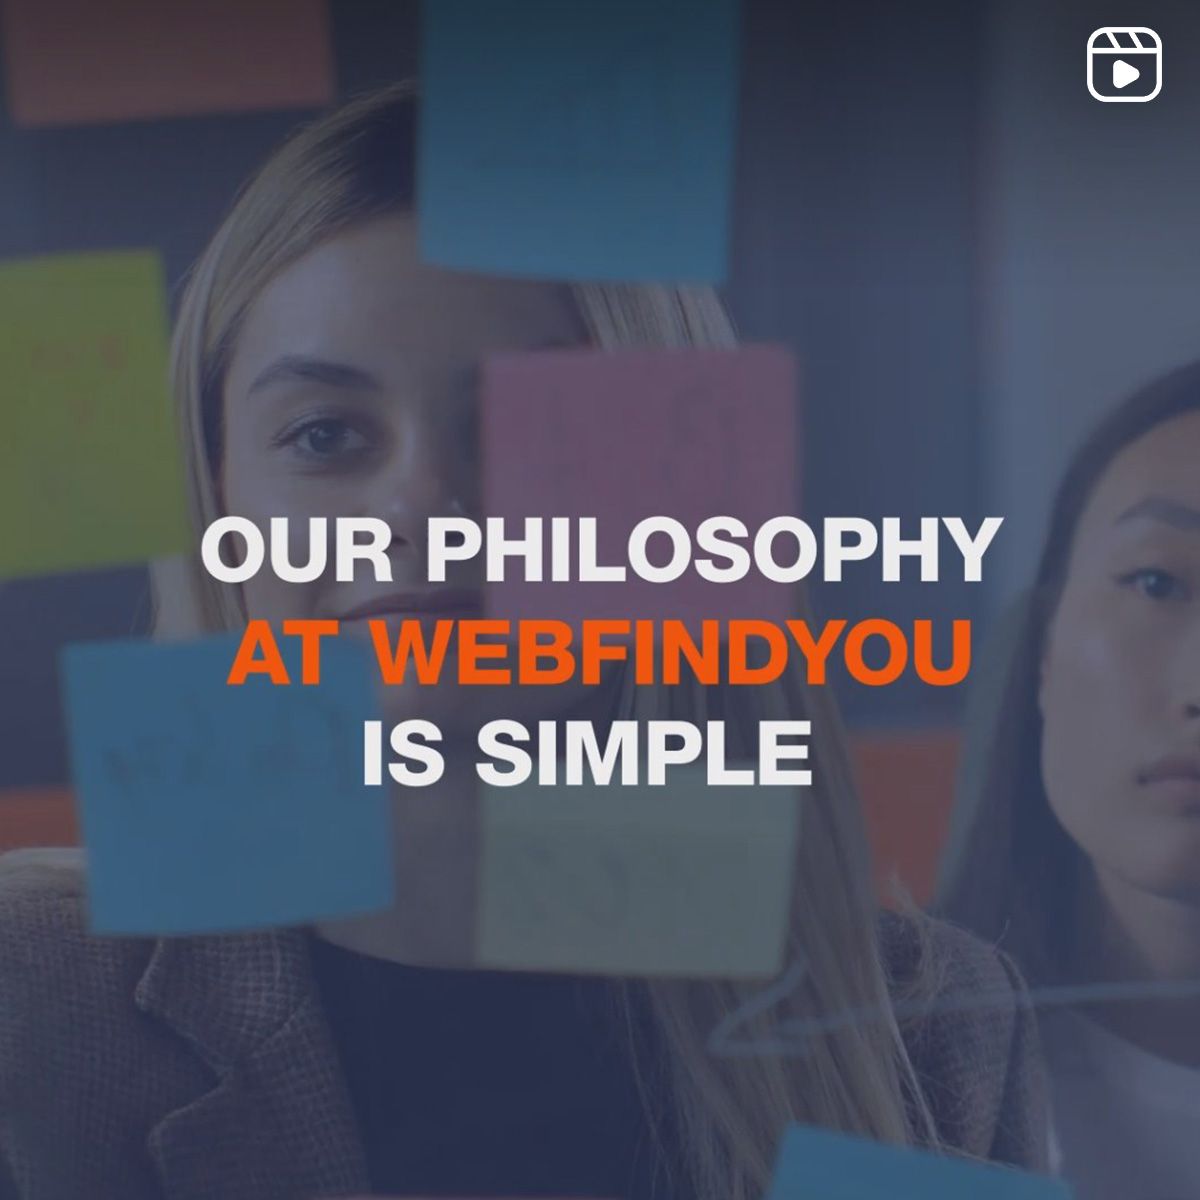 Our philosophy at WebFindYou